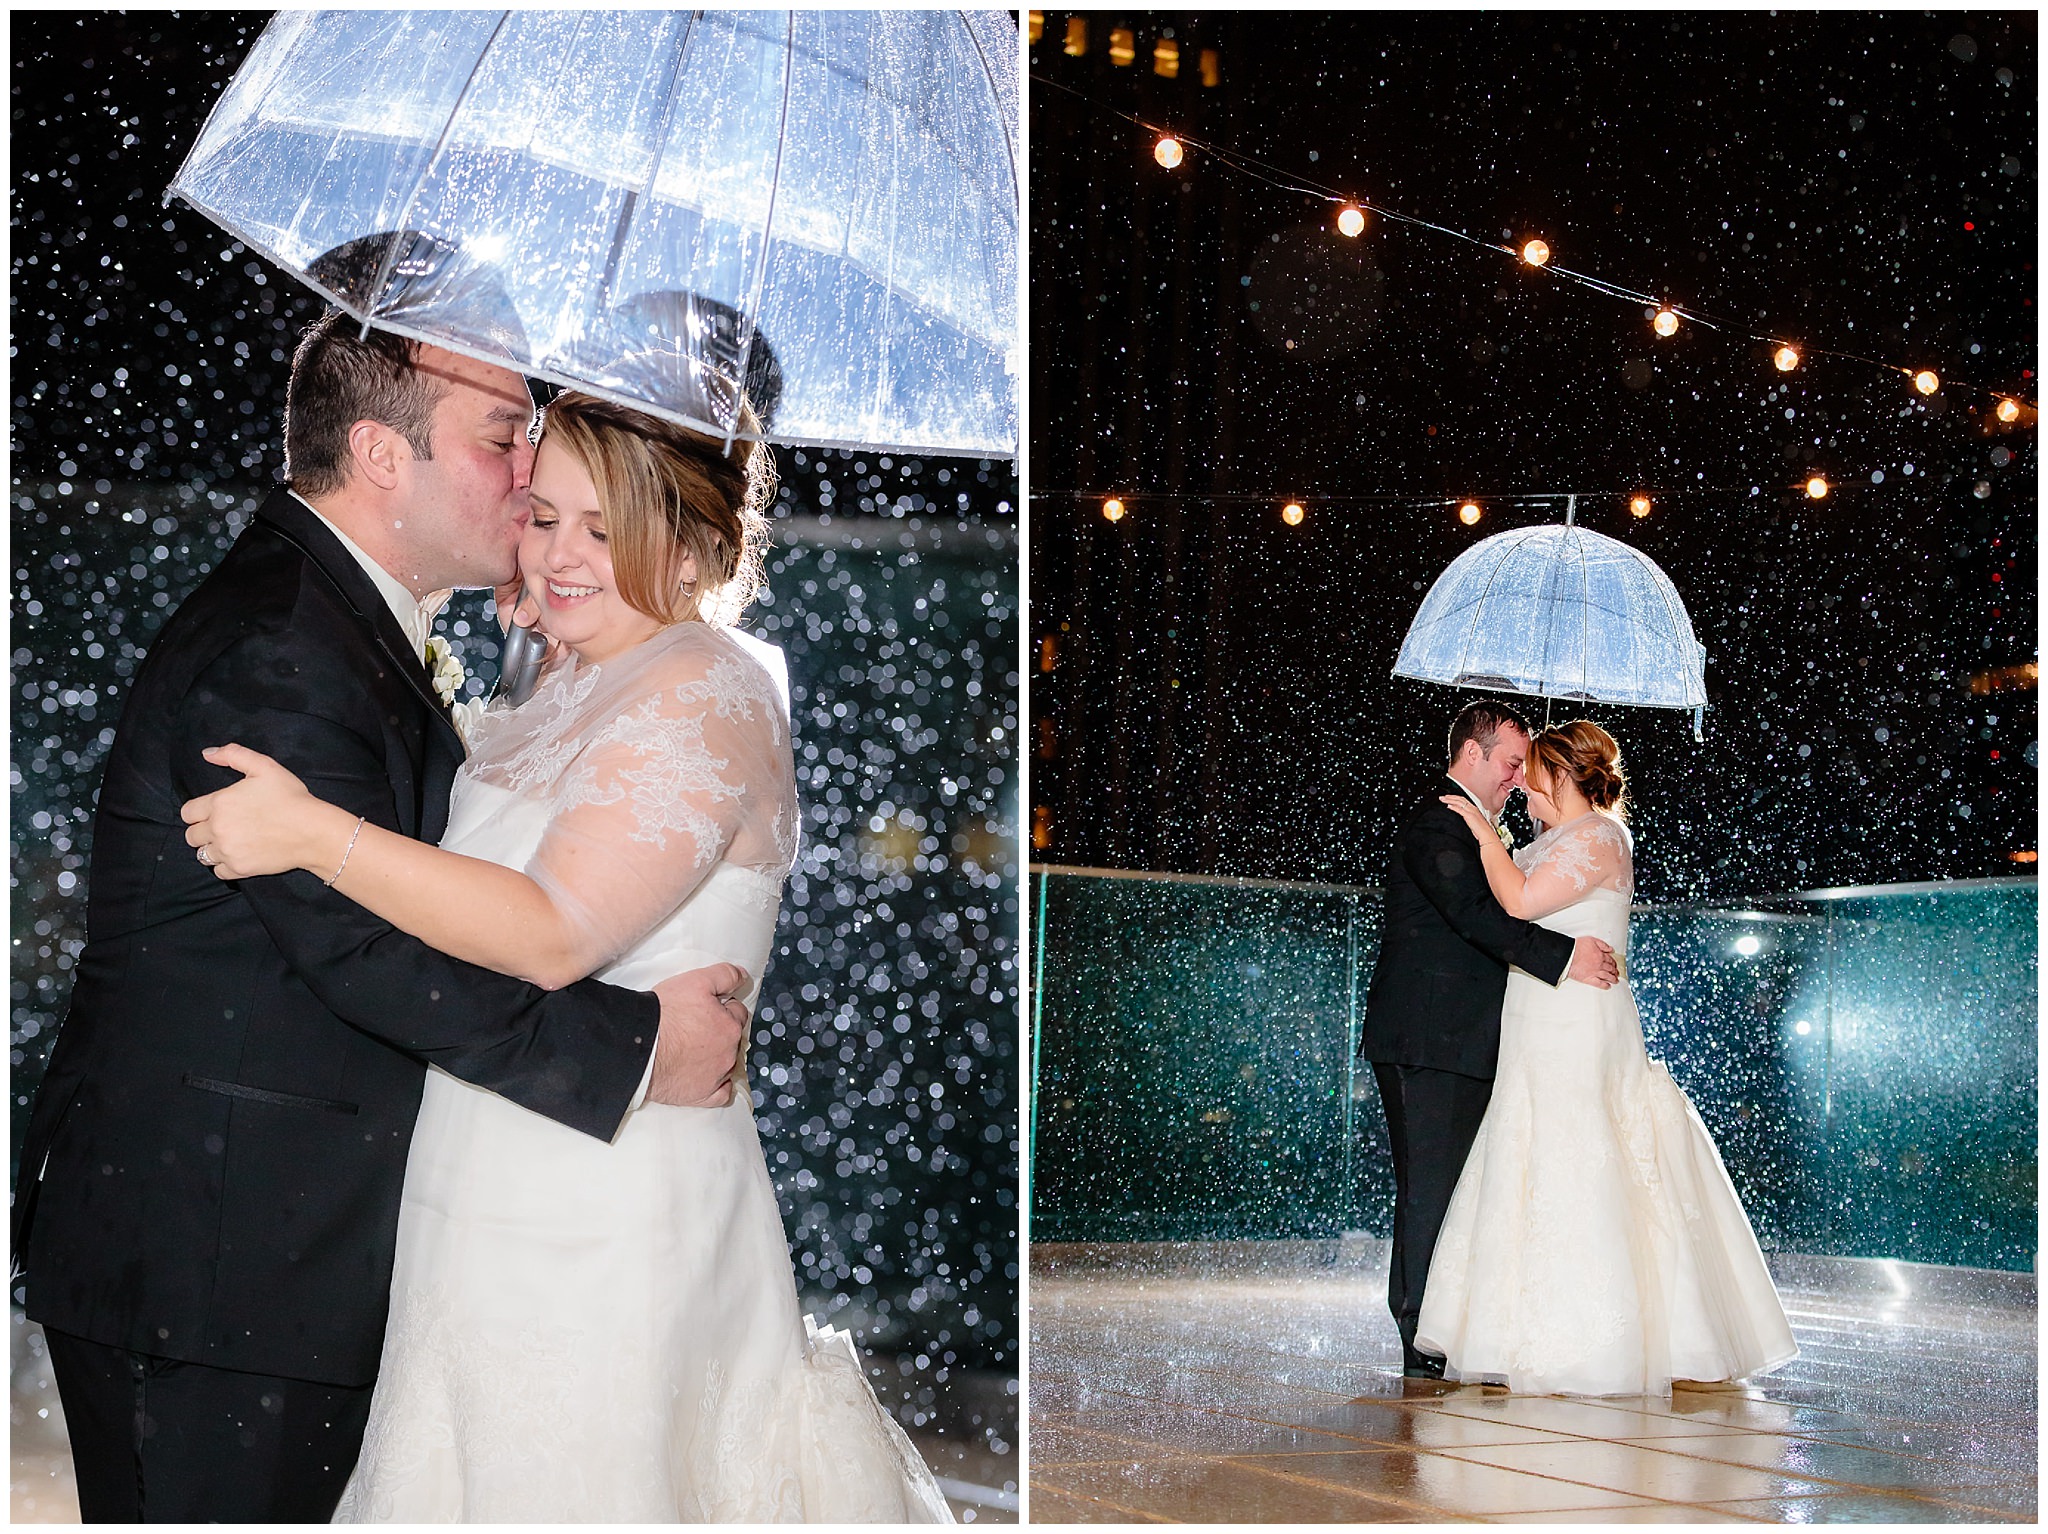 Bride & groom portraits in the rain on the rooftop patio of Pittsburgh's Hotel Monaco